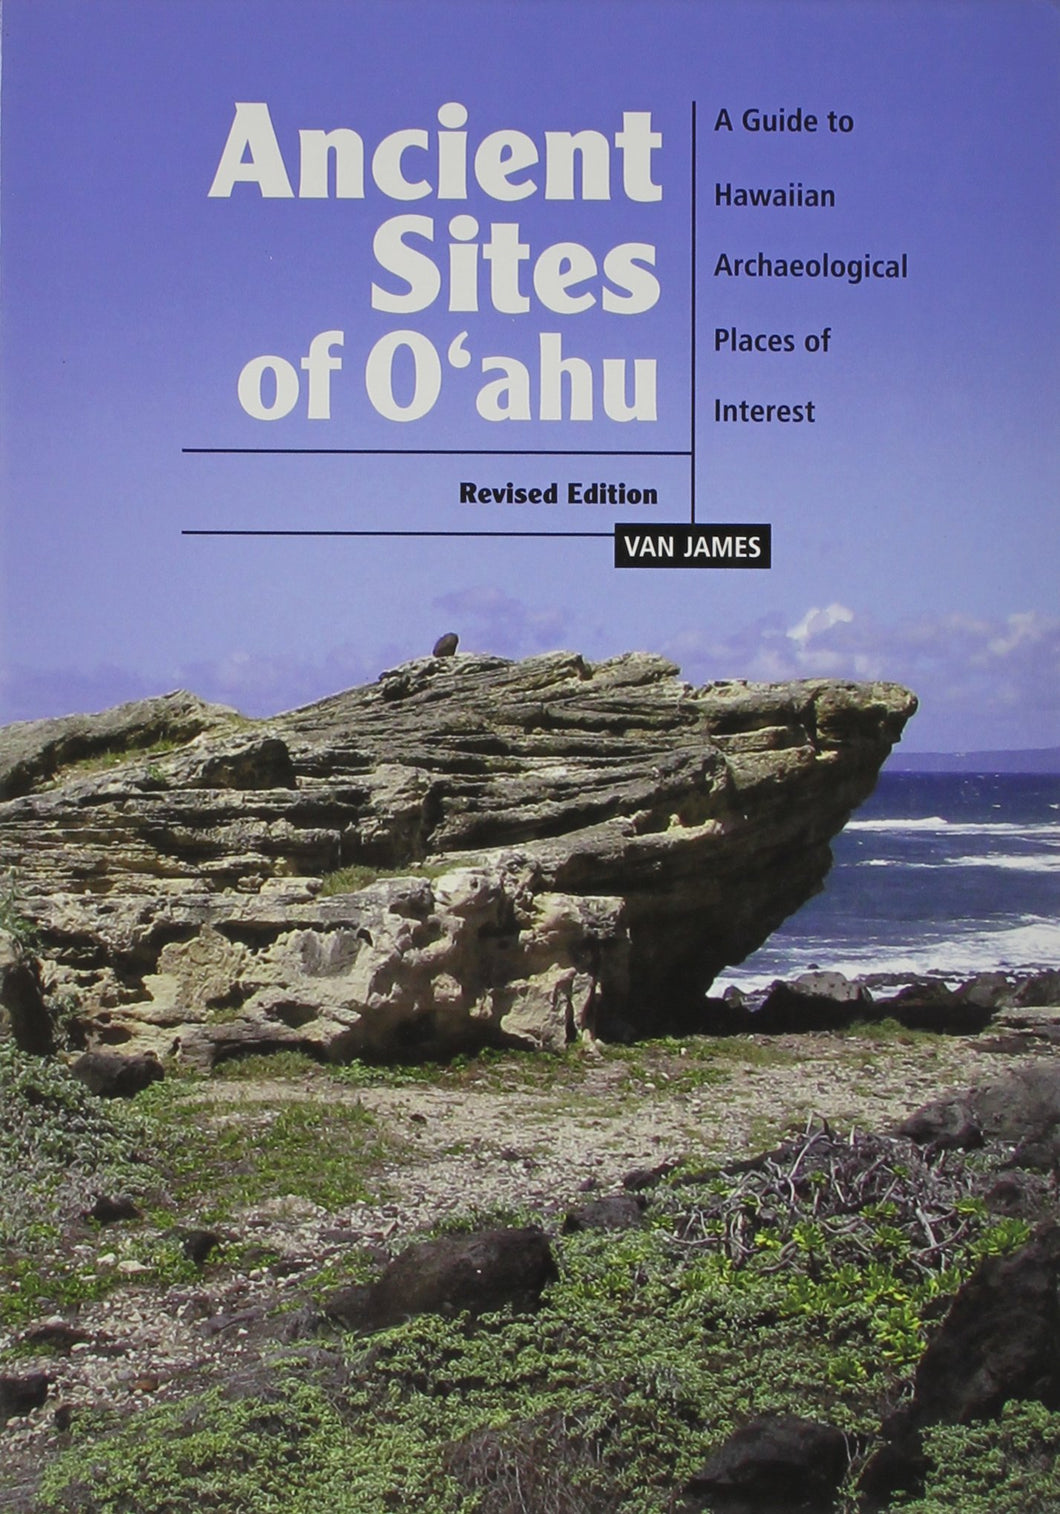 Ancient Sites of Oahu: A Guide to Archaeological Places of Interest by James Van